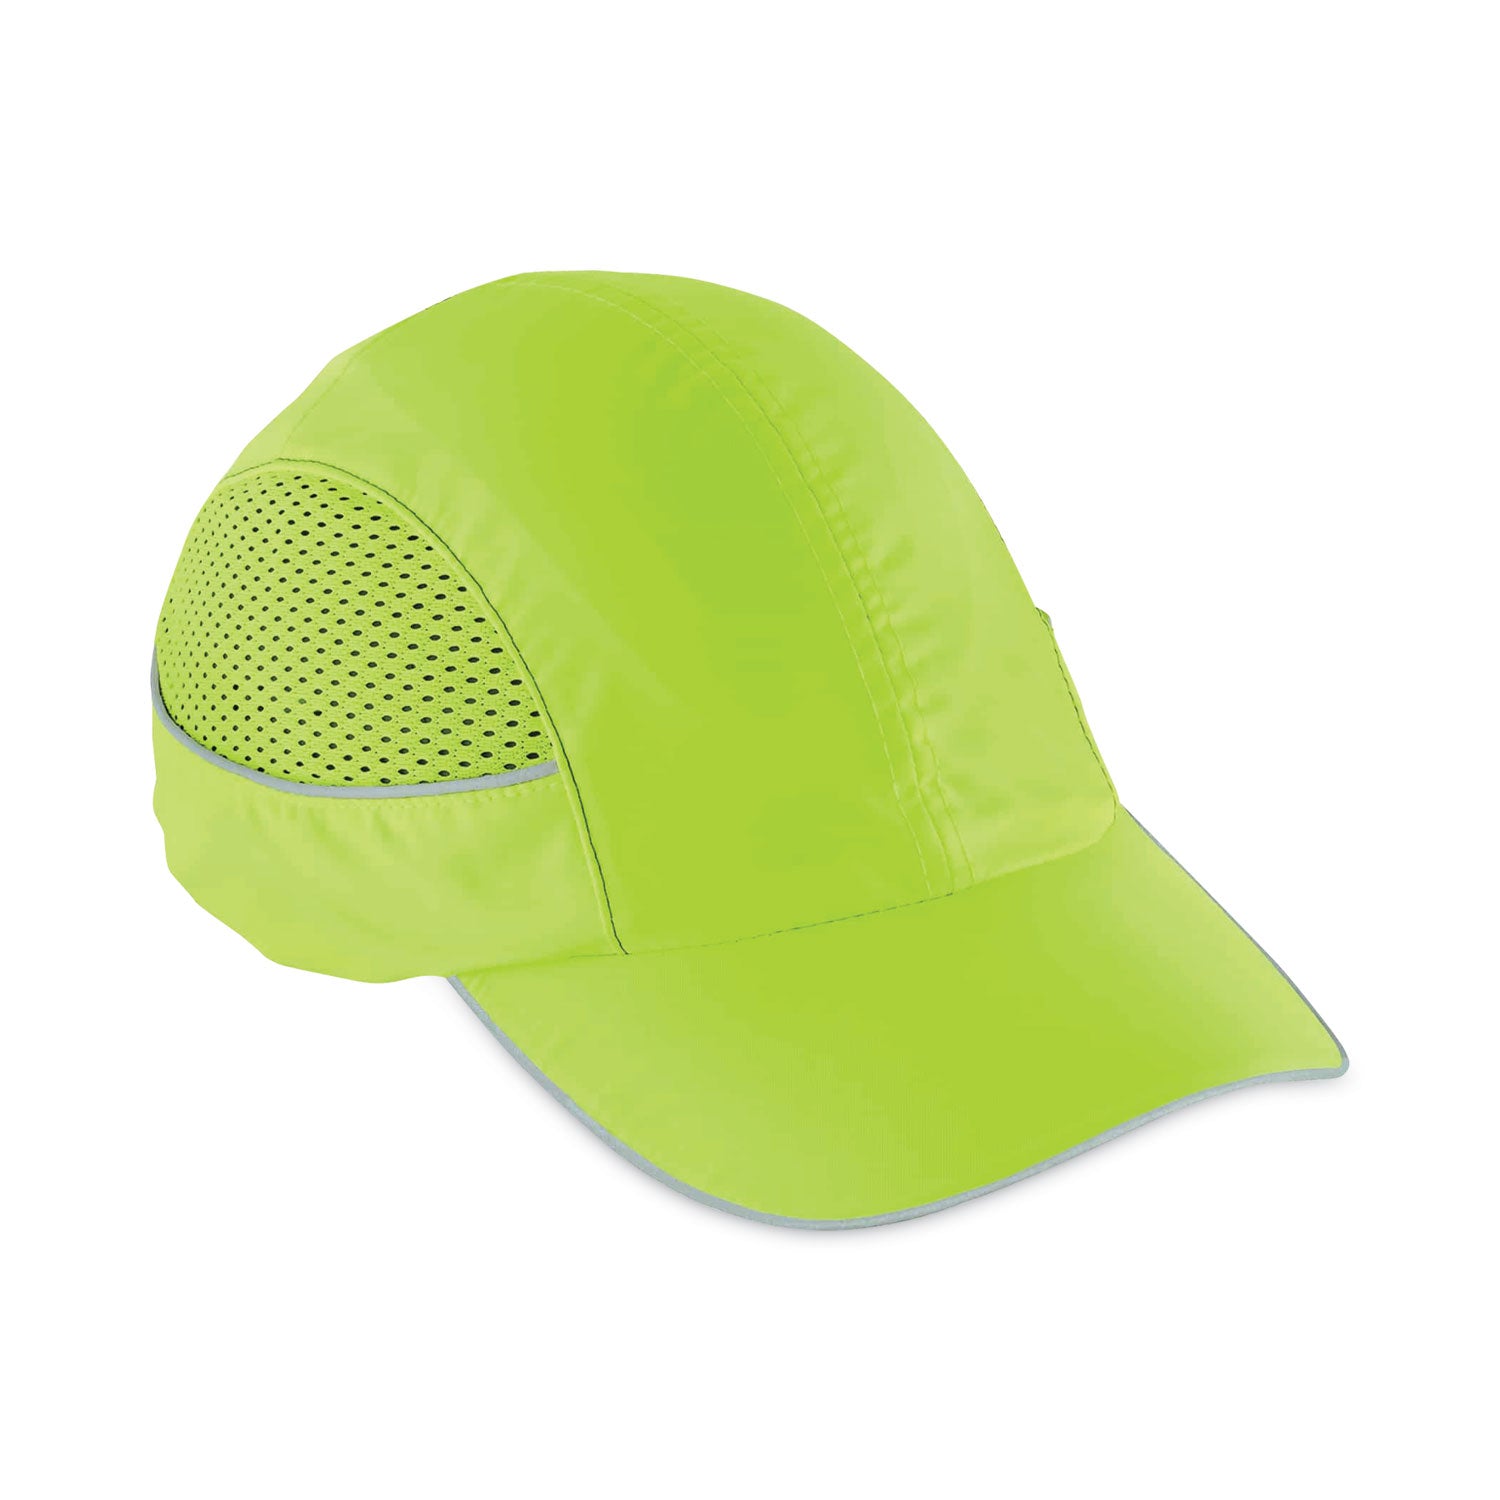 skullerz-8960-bump-cap-with-led-lighting-long-brim-lime-green-ships-in-1-3-business-days_ego23379 - 8